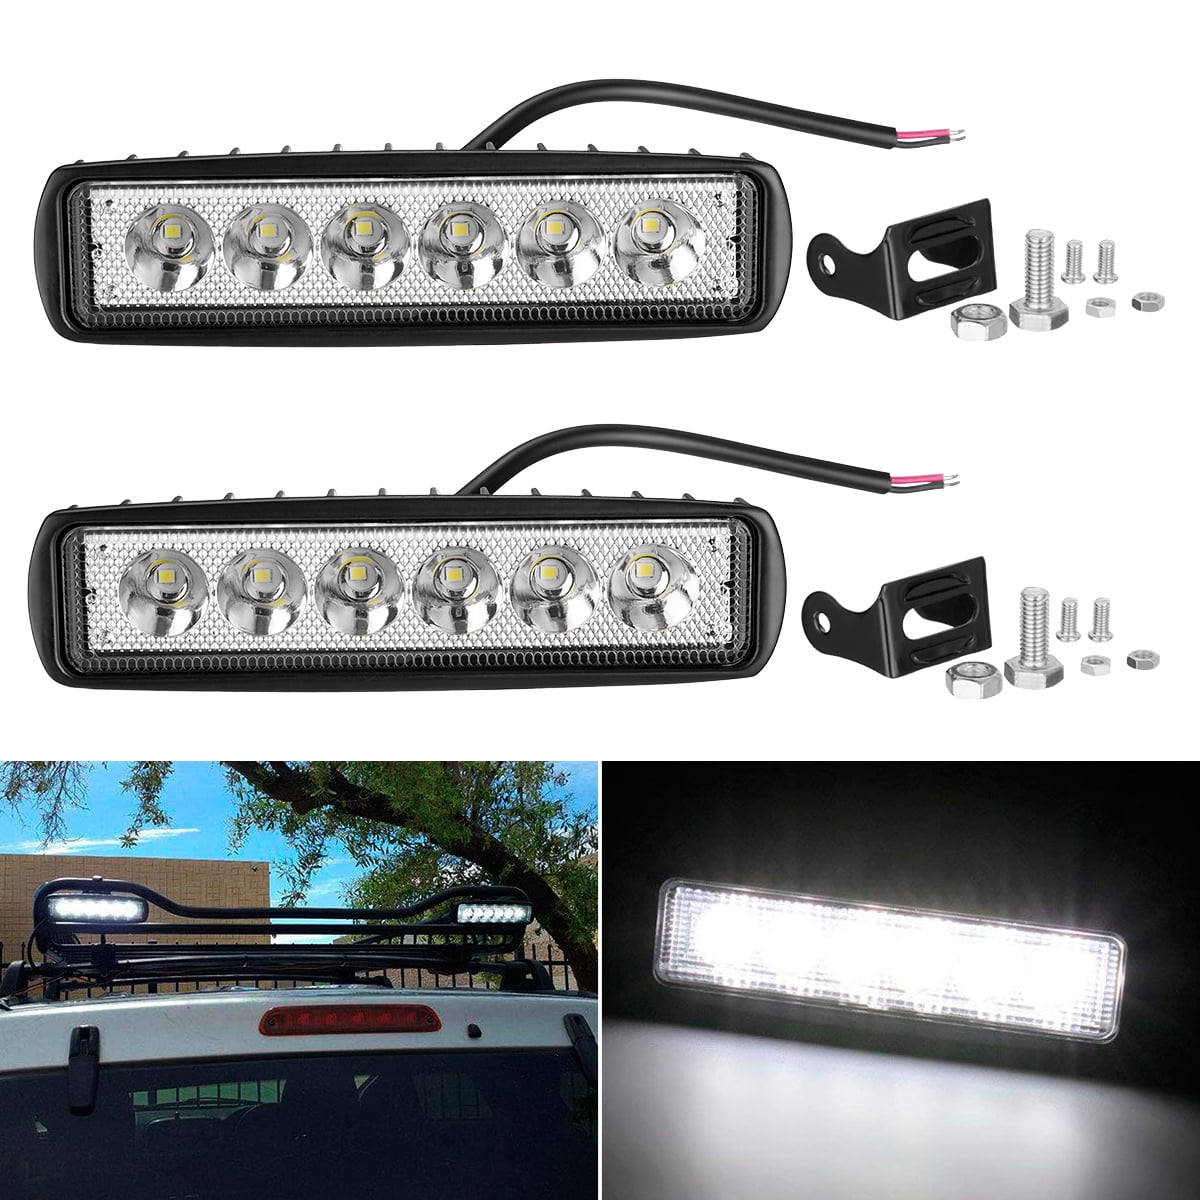 6 Inch LED Light Bar Amber Protective Cover for 18W Single Row Light Bar WOW 